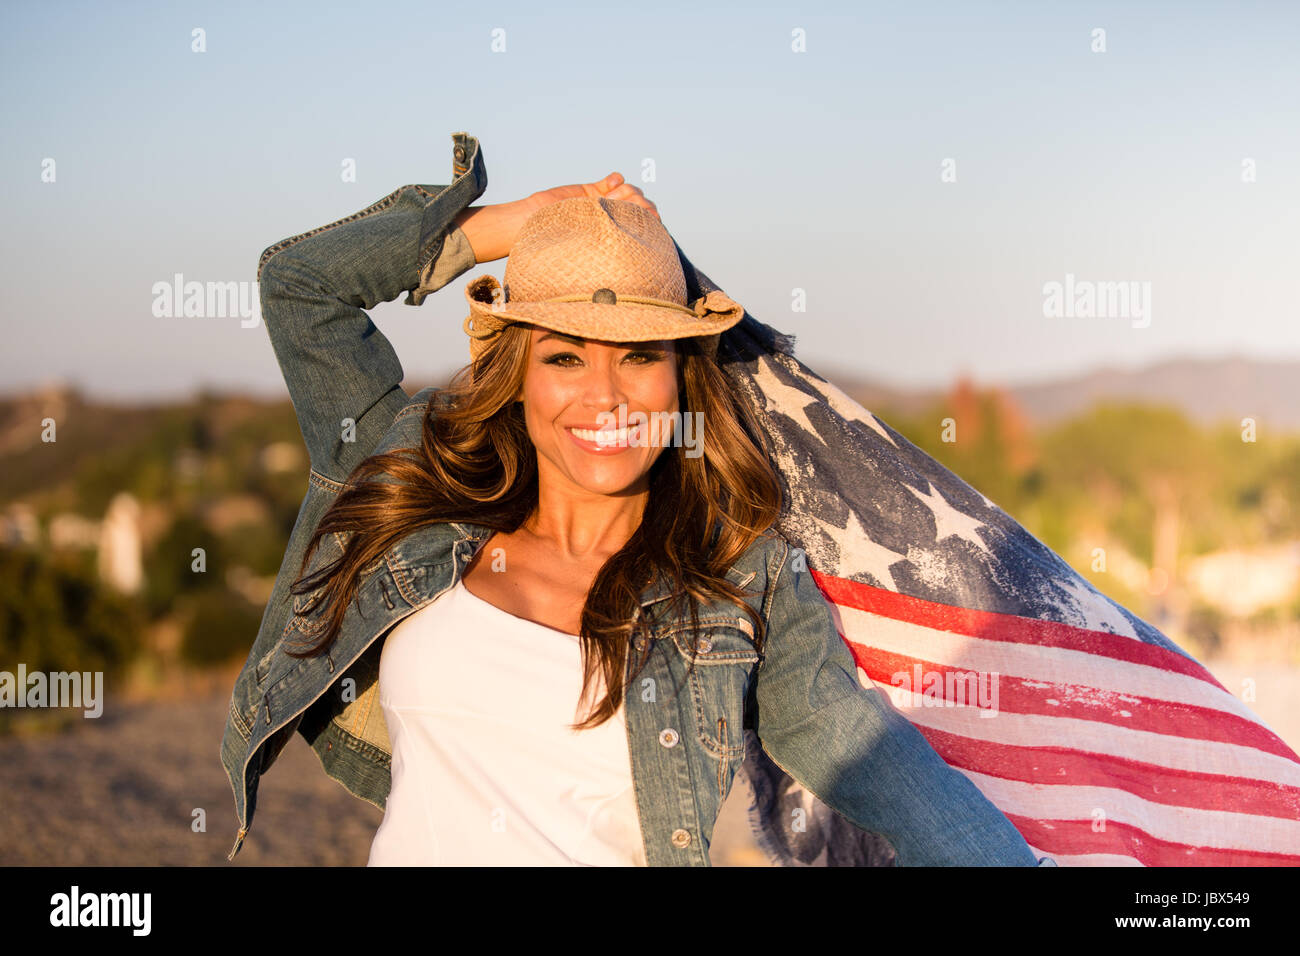 Portrait of mature woman, outdoors, holding American flag, smiling Stock Photo